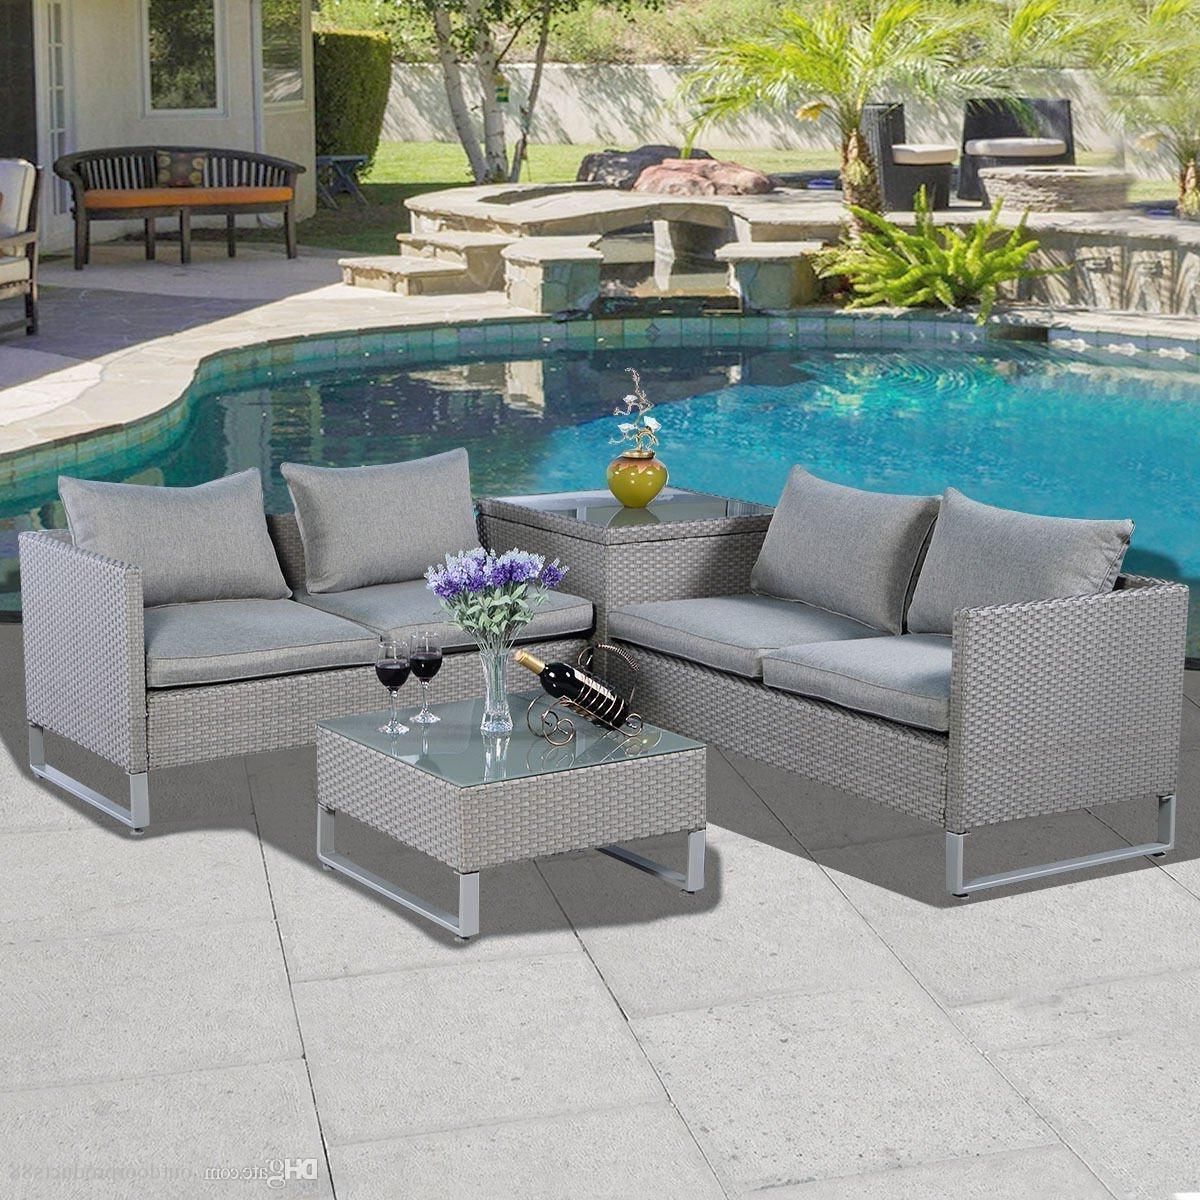 2021 All Weather Outdoor Furniture Garden Furniture Sofa Set New Style Within Most Current Outdoor Wicker Gray Cushion Patio Sets (View 3 of 15)